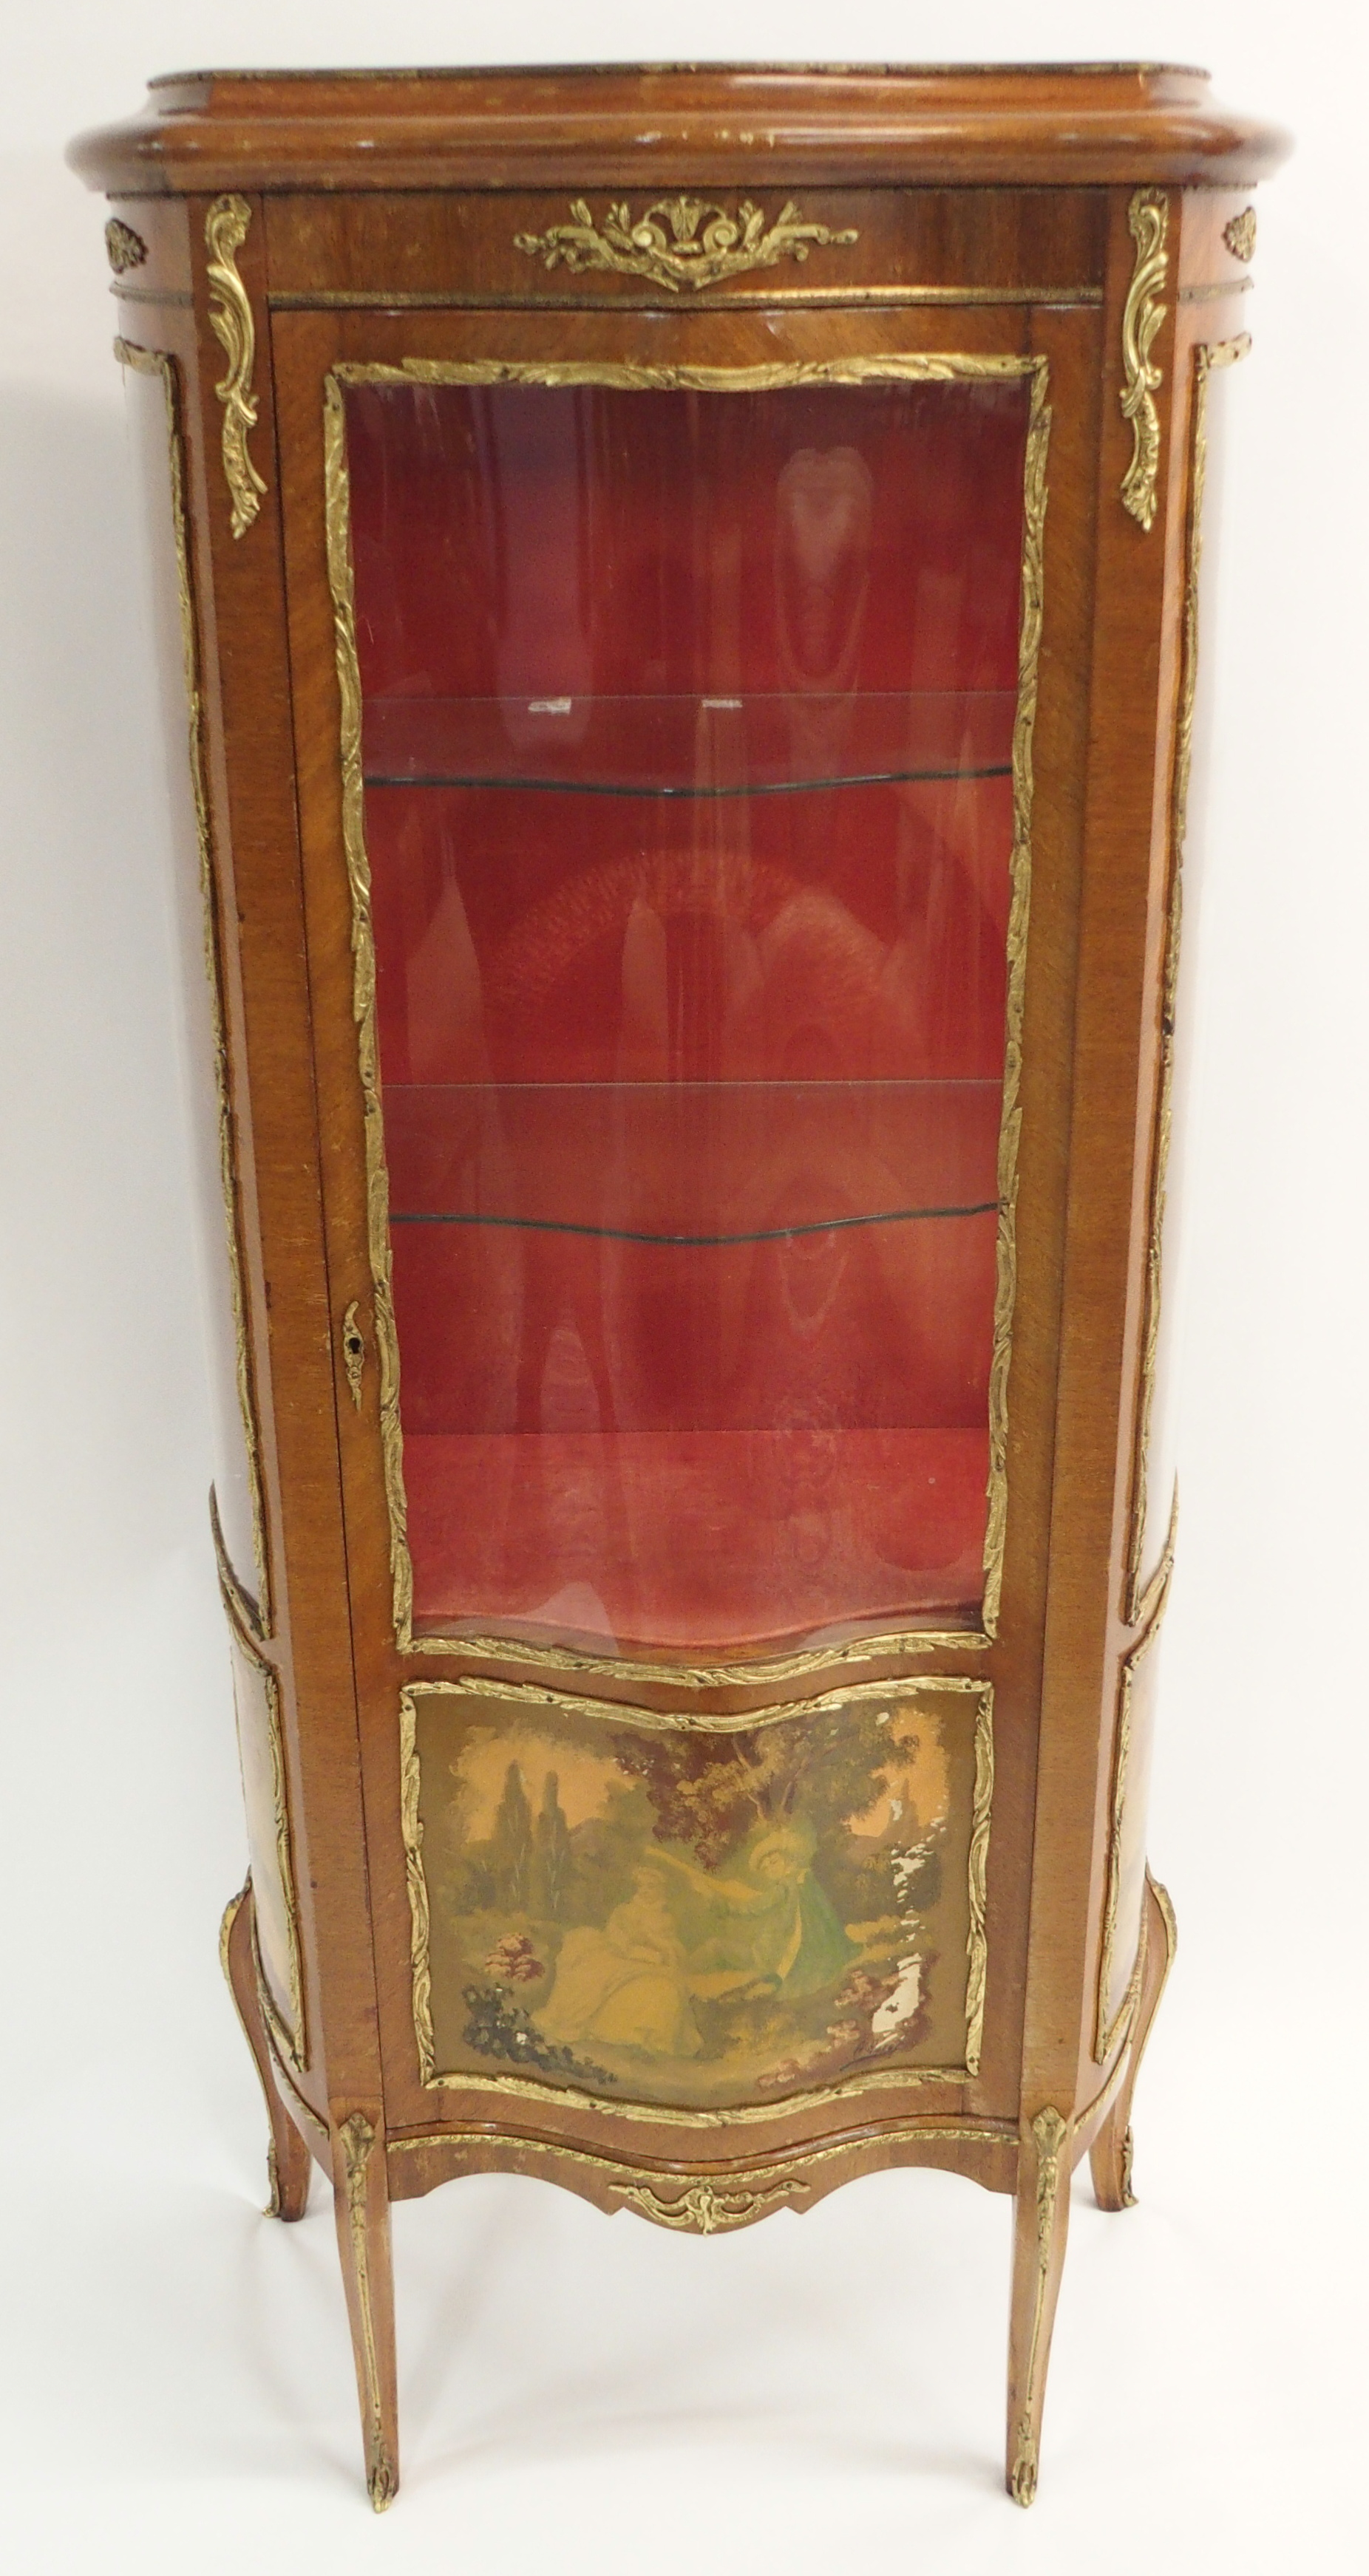 A VERNIS MARTIN STYLE FRUITWOOD DISPLAY CABINET the serpentine door and sides enclosing glass